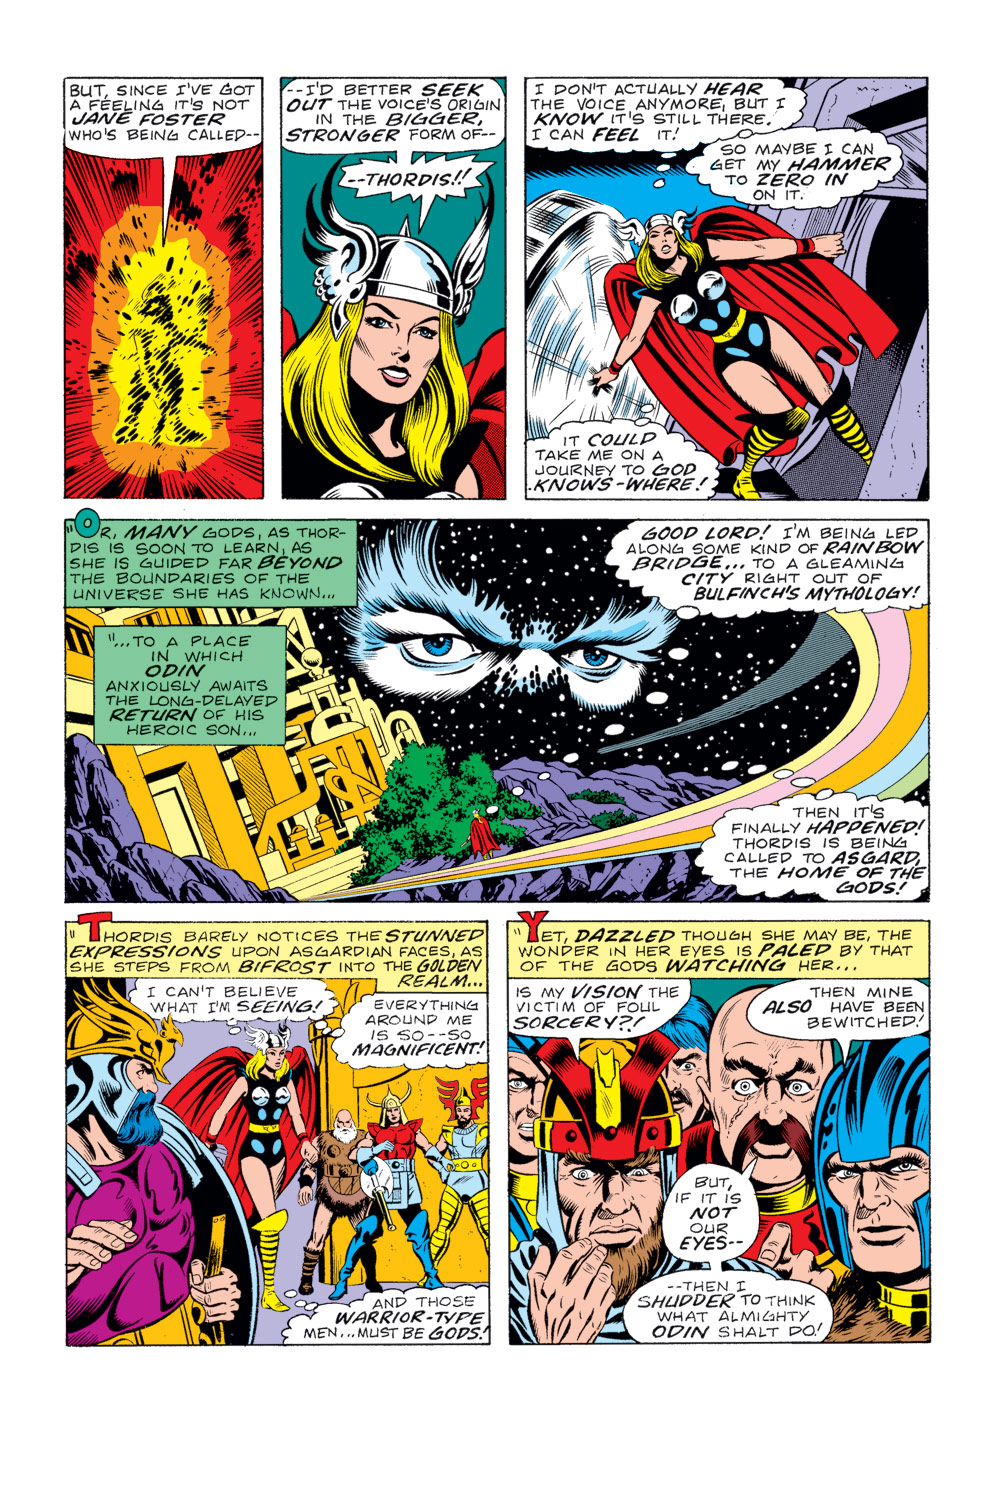 What If? (1977) issue 10 - Jane Foster had found the hammer of Thor - Page 18